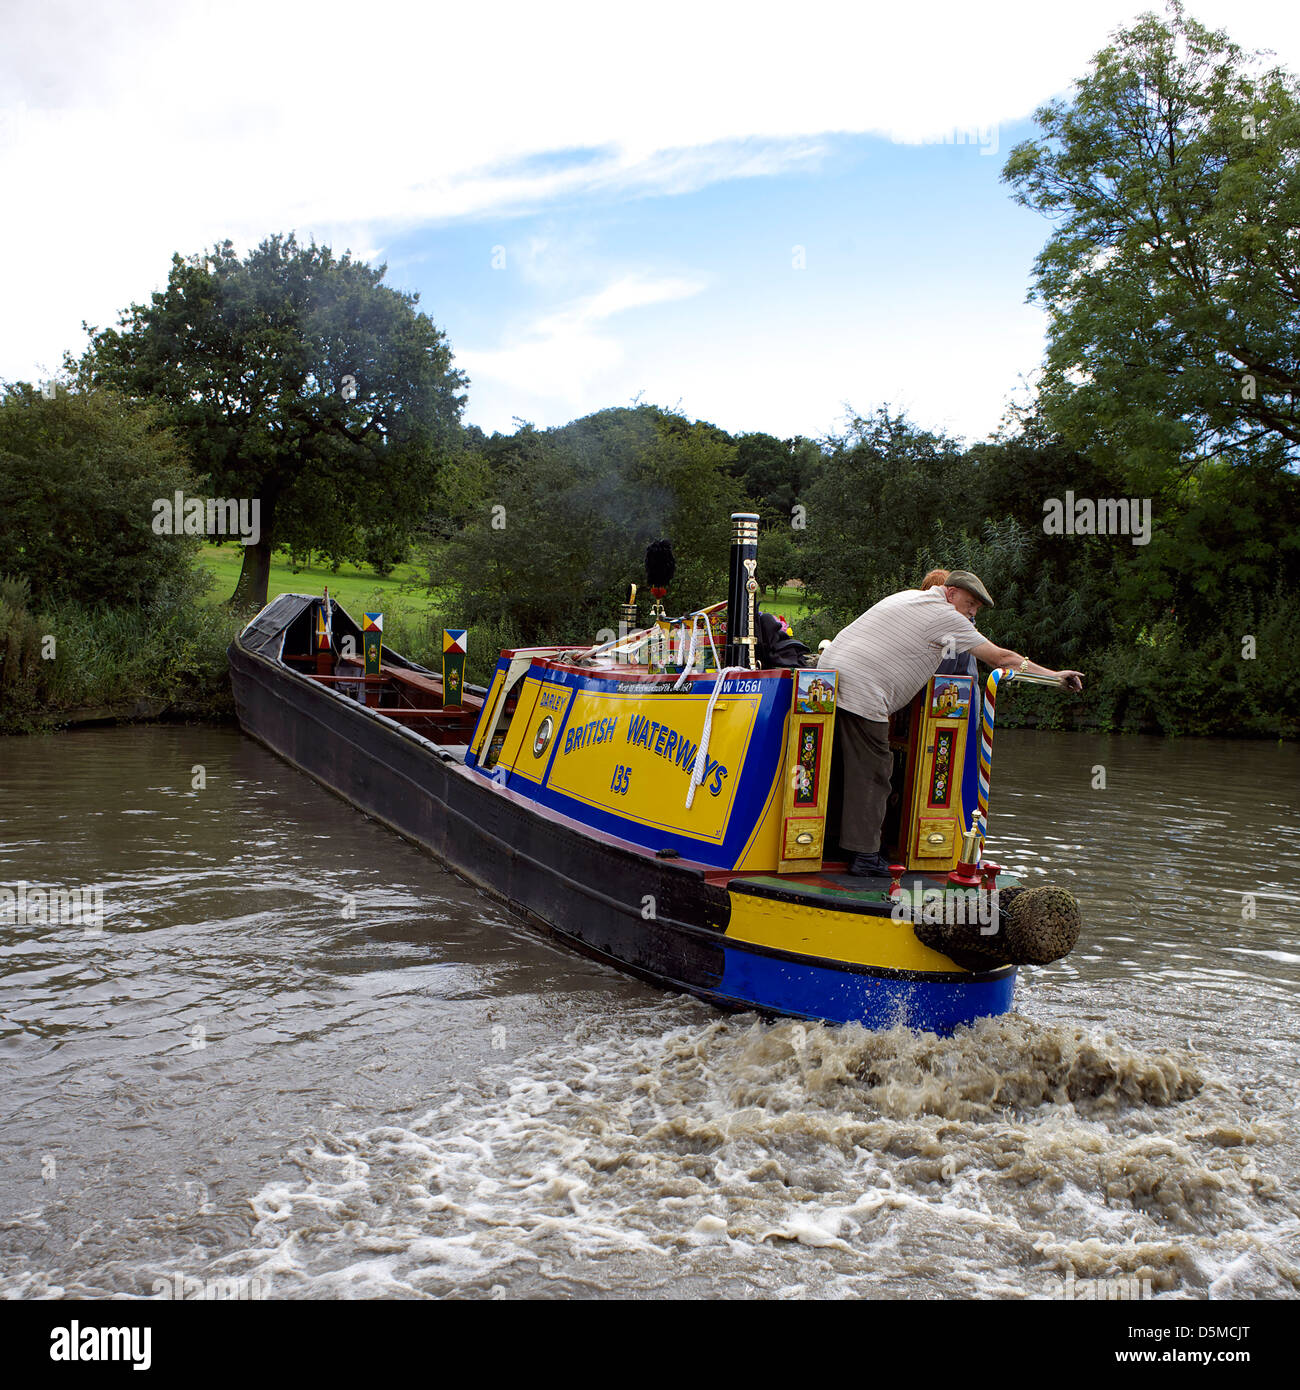 British Waterways boat 135 Darley turning at the Alvecote winding hole Coventry Canal during the 2012 Alvecote Historic Boat Stock Photo